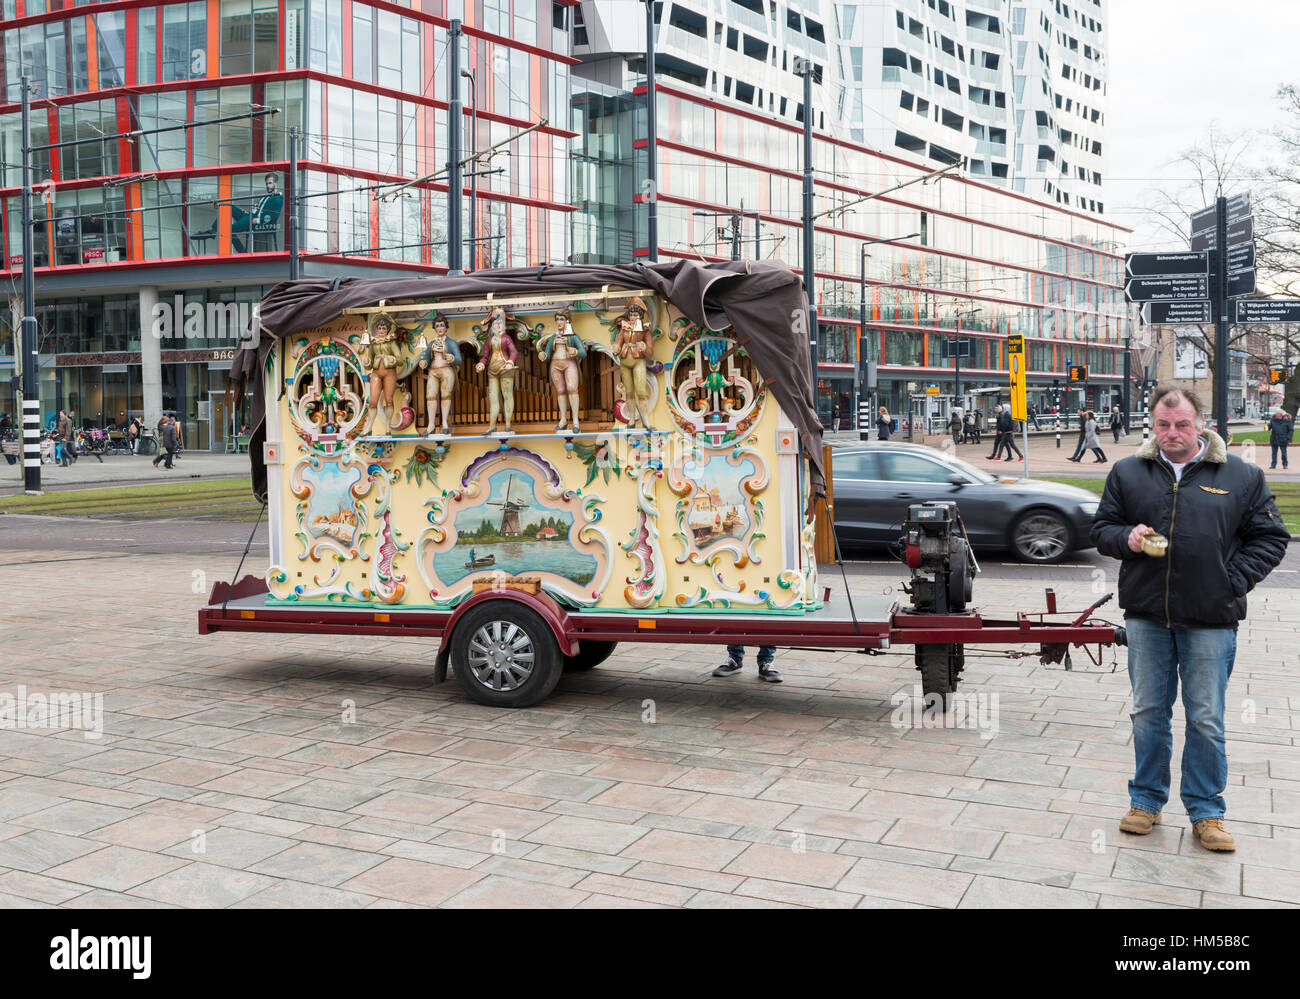 ROTTERDAM, THE NETHERLANDS - JANUARY 28 2017: Man with  Barrel organ or street organ  plays music in the center of Rotterdam for the Chinese new years Stock Photo